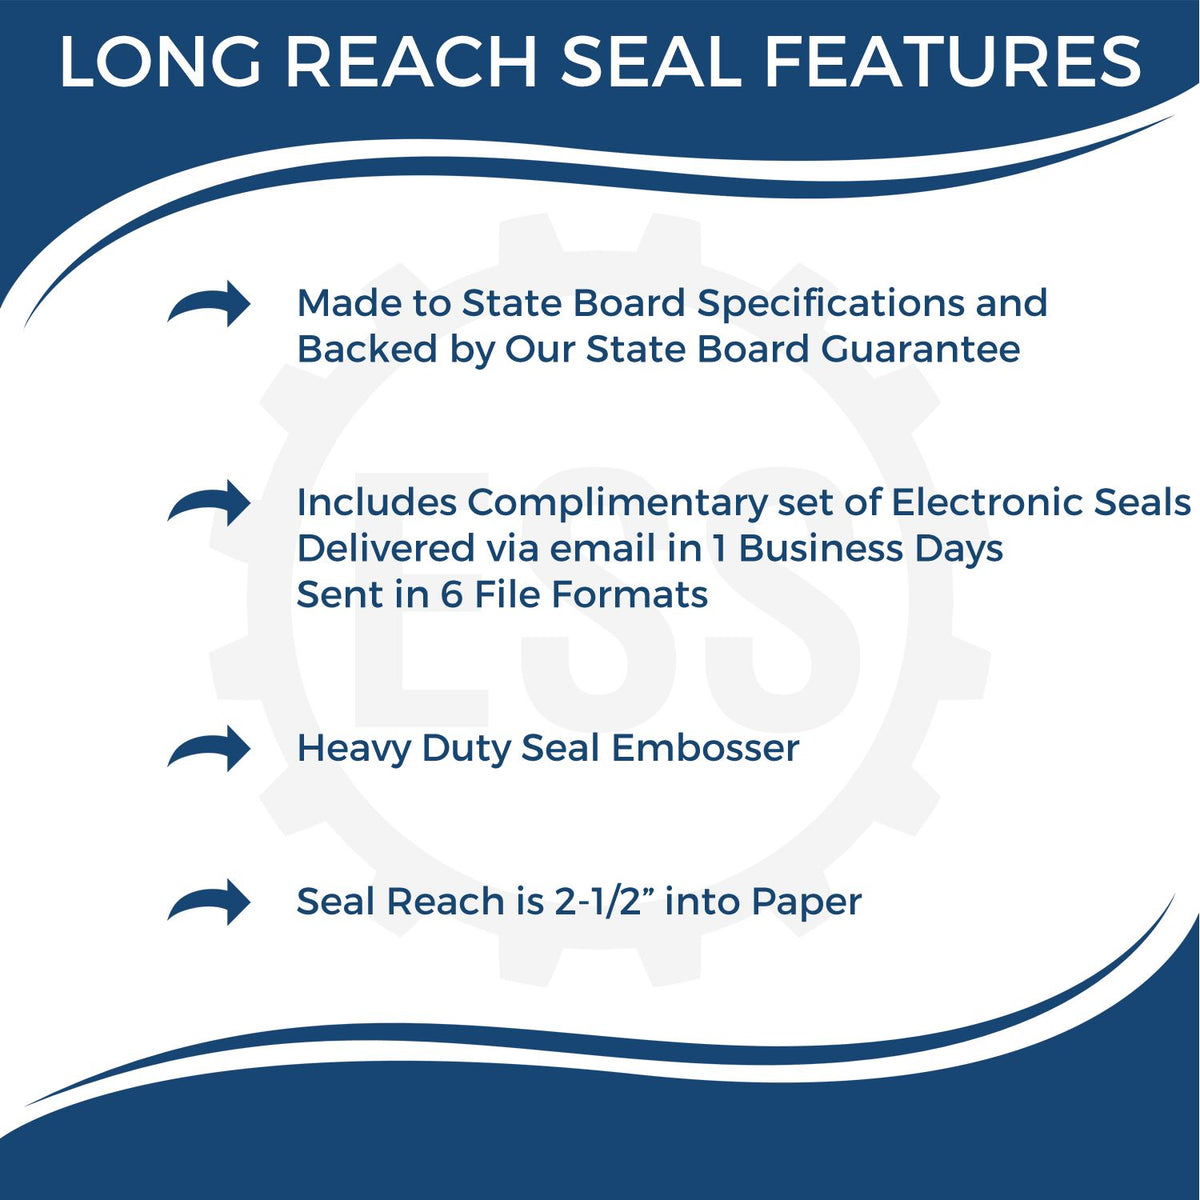 A picture of an infographic highlighting the selling points for the Long Reach Delaware Geology Seal